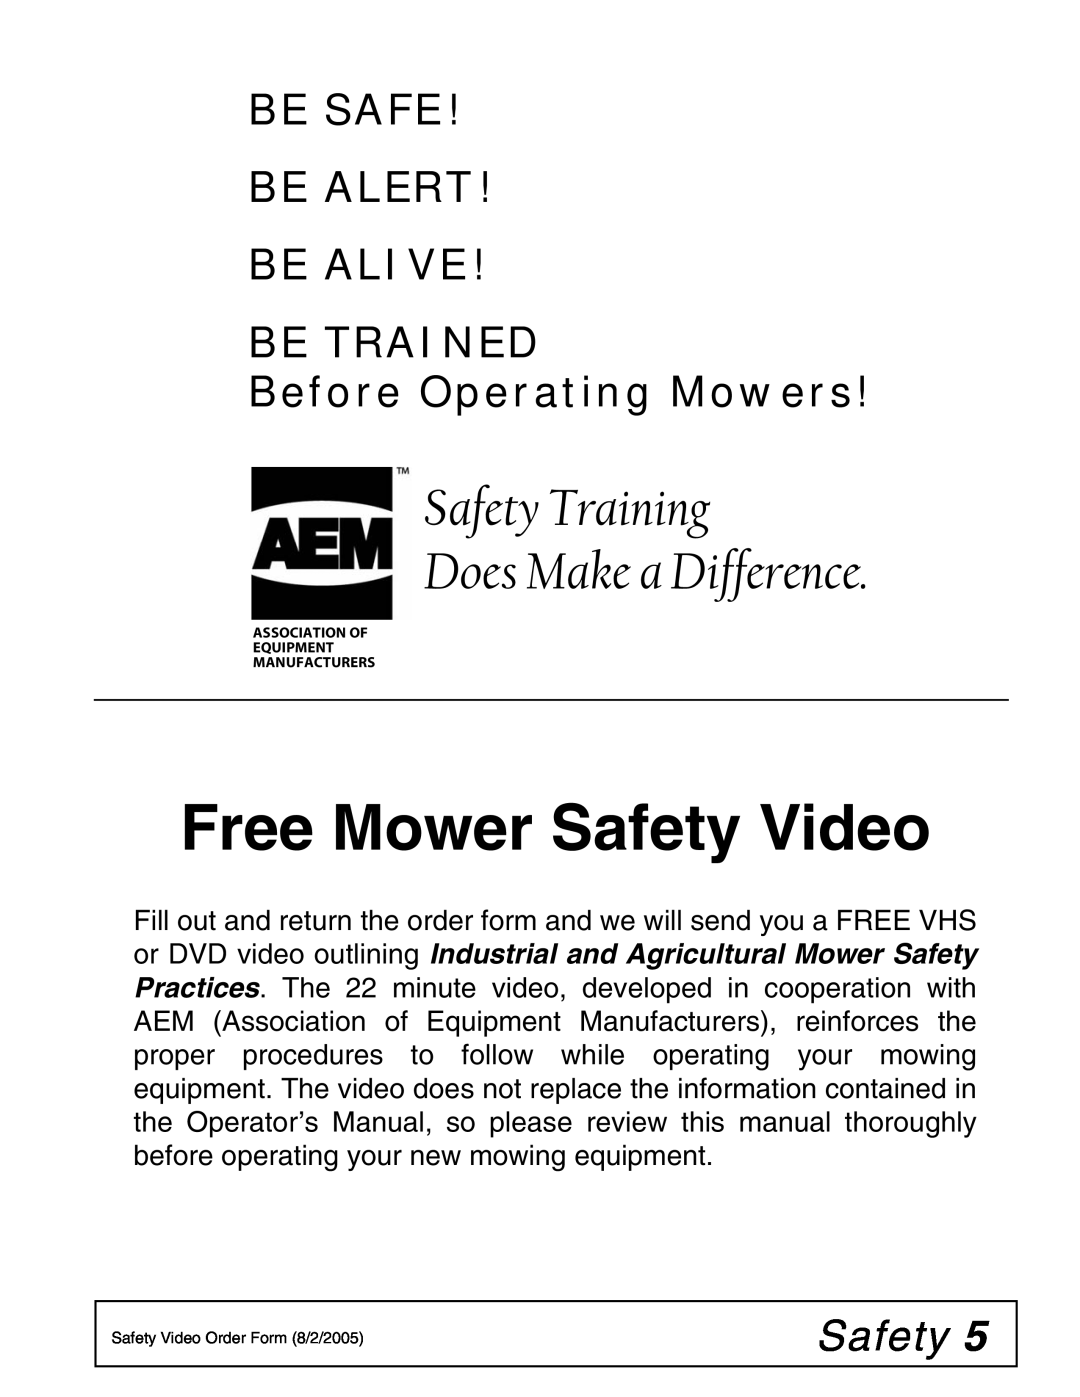 Woods Equipment DS120, DS96 manual Free Mower Safety Video, Safety Training Does Make a Difference 